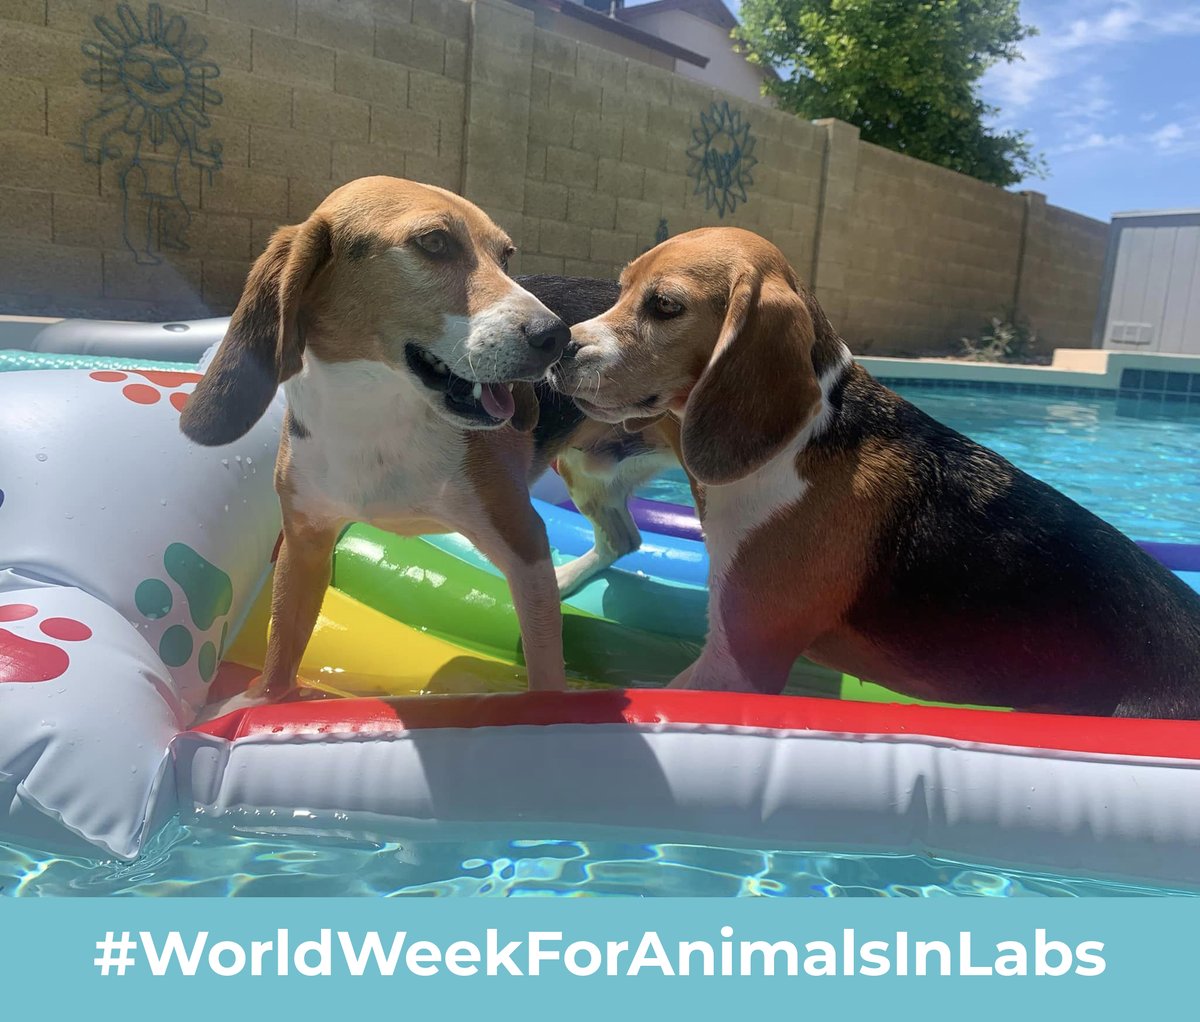 #WorldWeekForAnimalsInLabs

We rescued Charlotte & Chili when they were around 2 months old from animal research. Now they live in Arizona with their amazing family and get to float to their hearts content.

Donate Now -> KindnessRanch.org